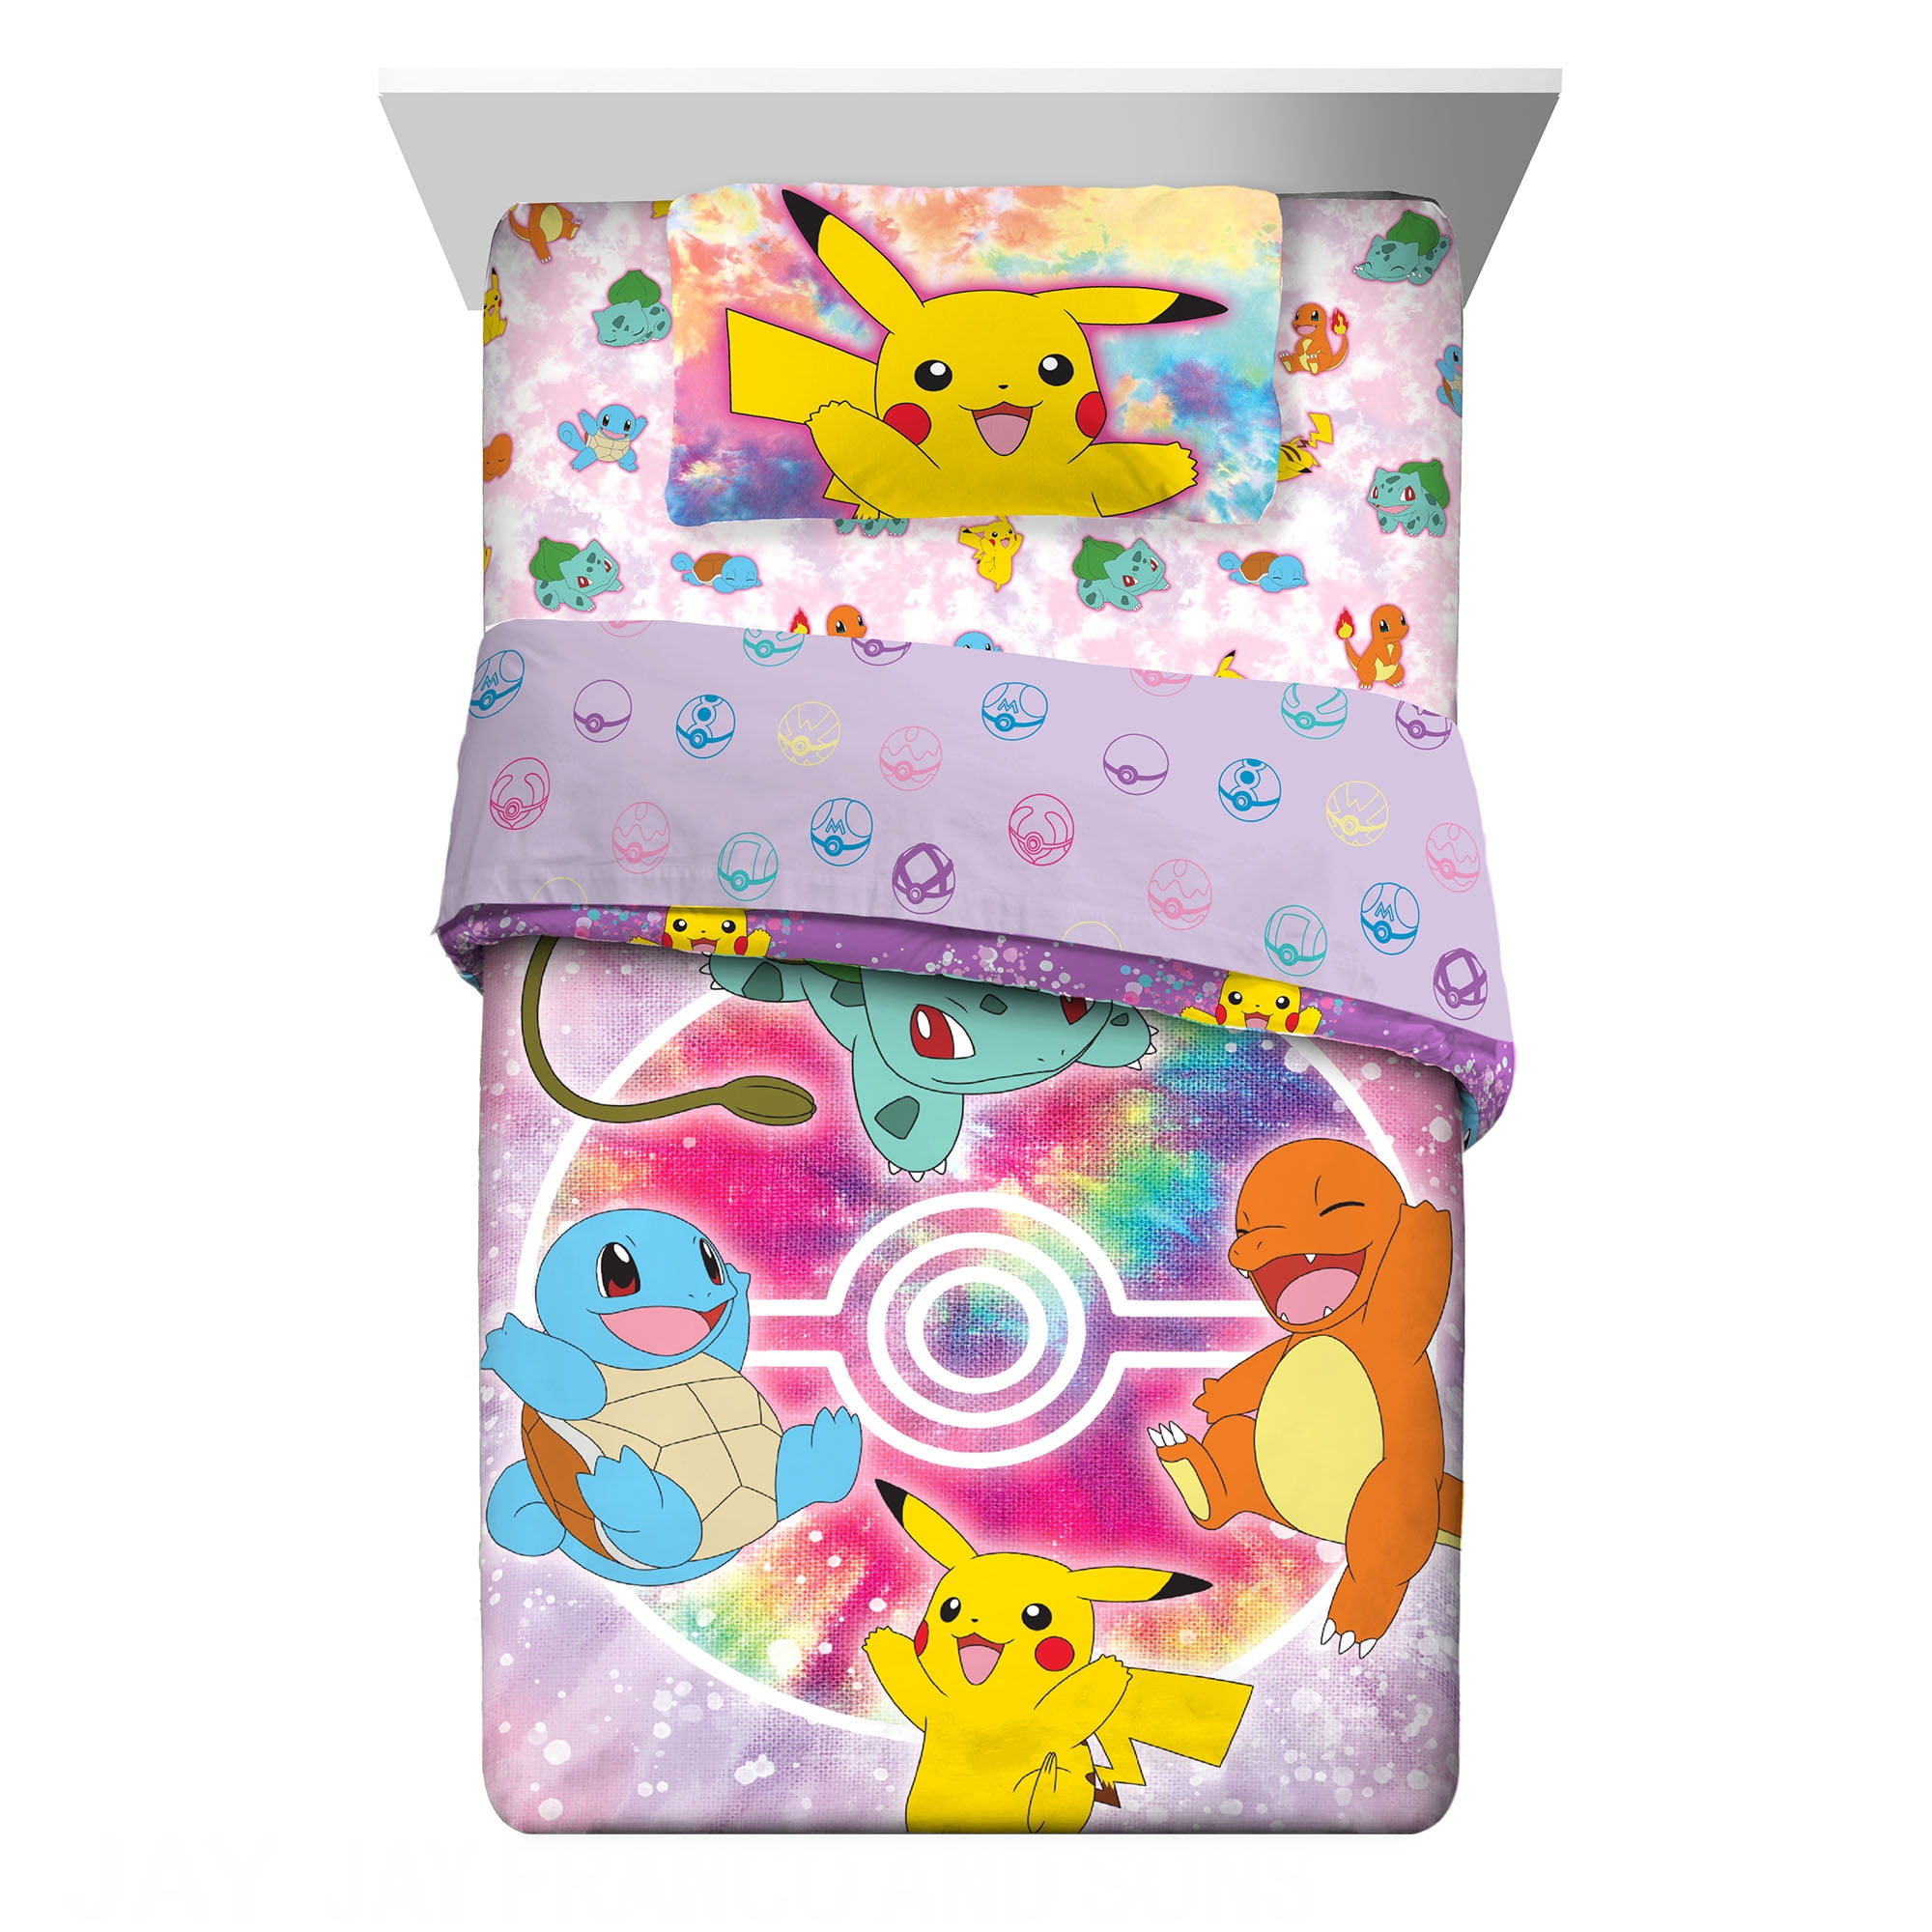 Pokémon Kids Full Bed in a Bag, Tie-Dye, Gaming Bedding, Comforter and Sheets, Purple